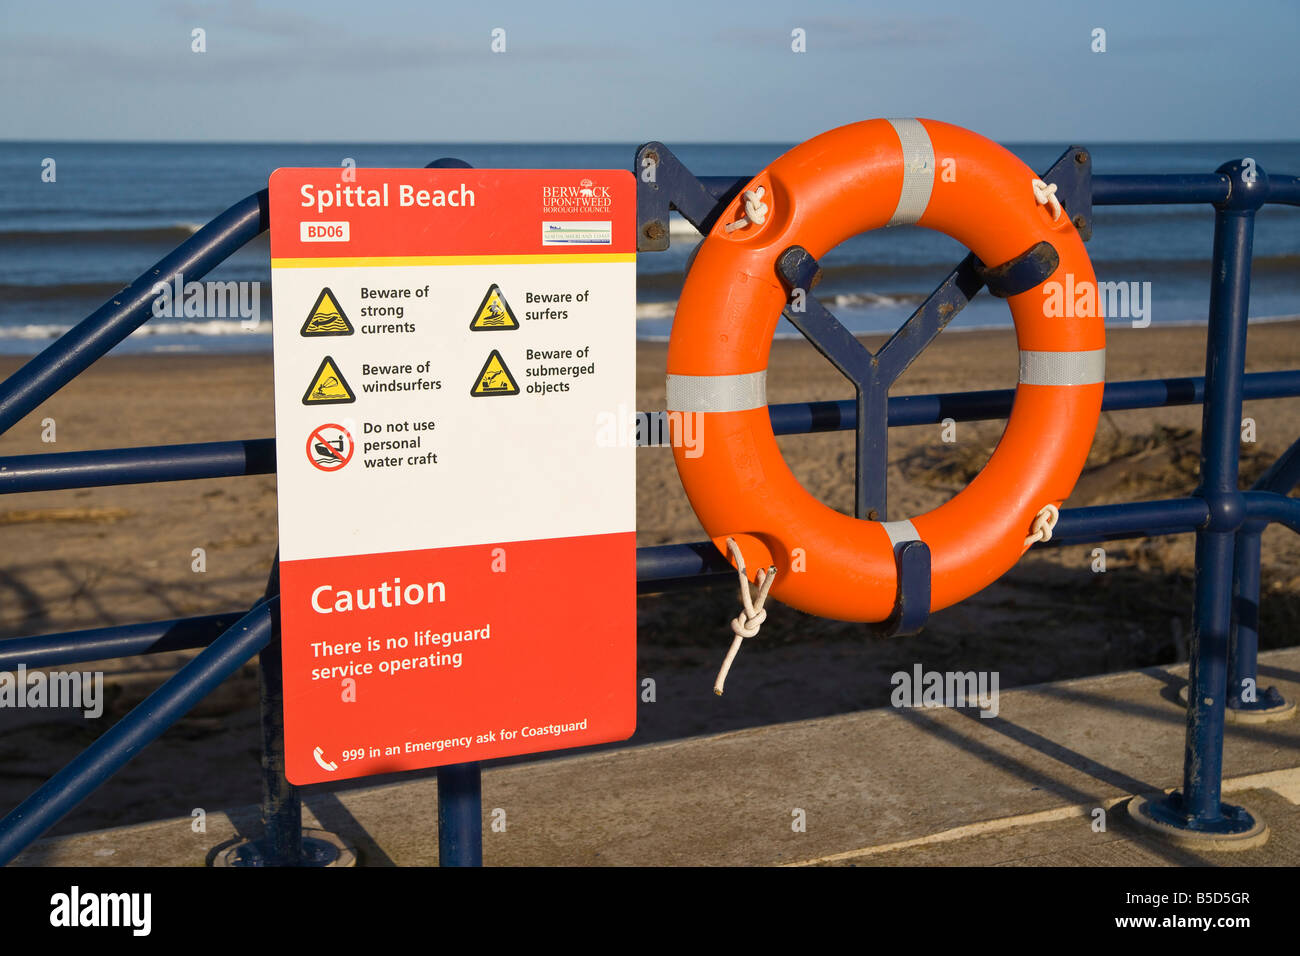 Spittal beach mouth of River Tweed near Berwick warning signs for water sports and current dangers Stock Photo